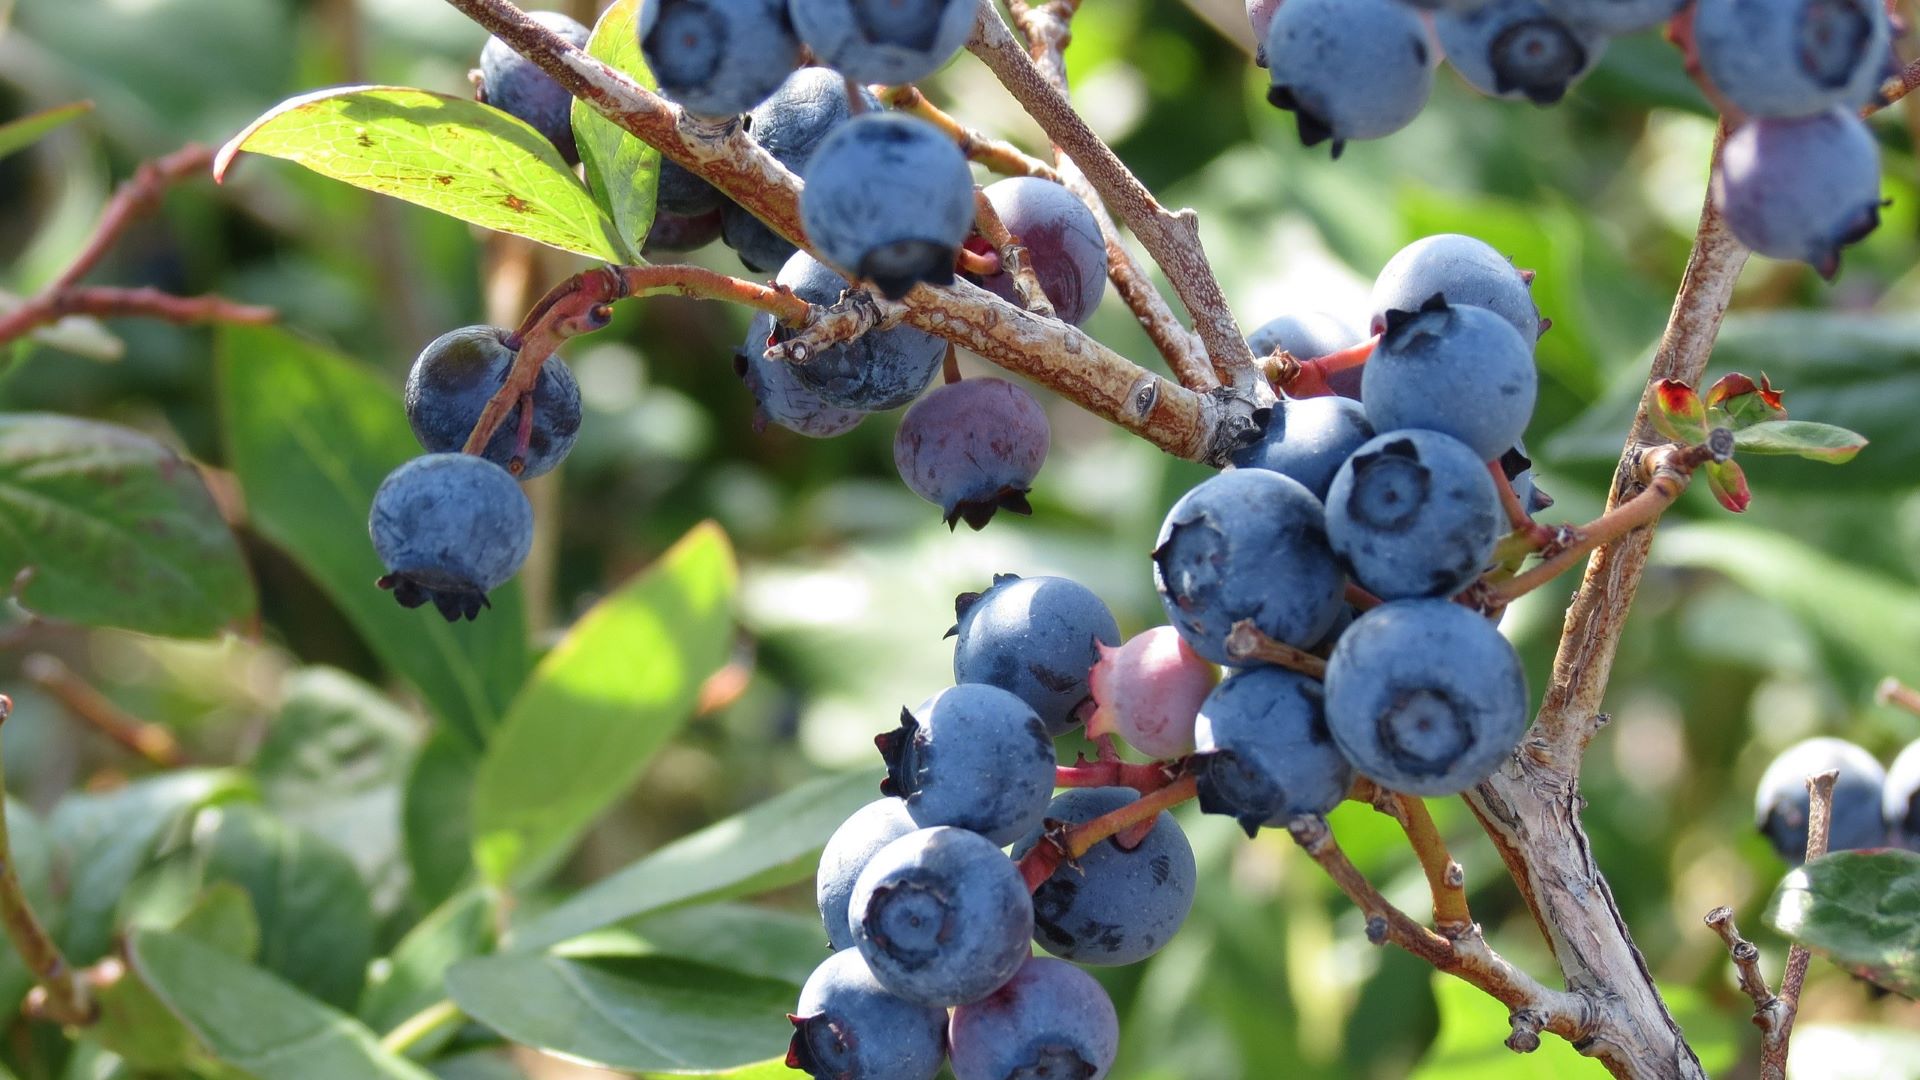 The bees are all right. And that’s good news for Maine’s blueberry crop.